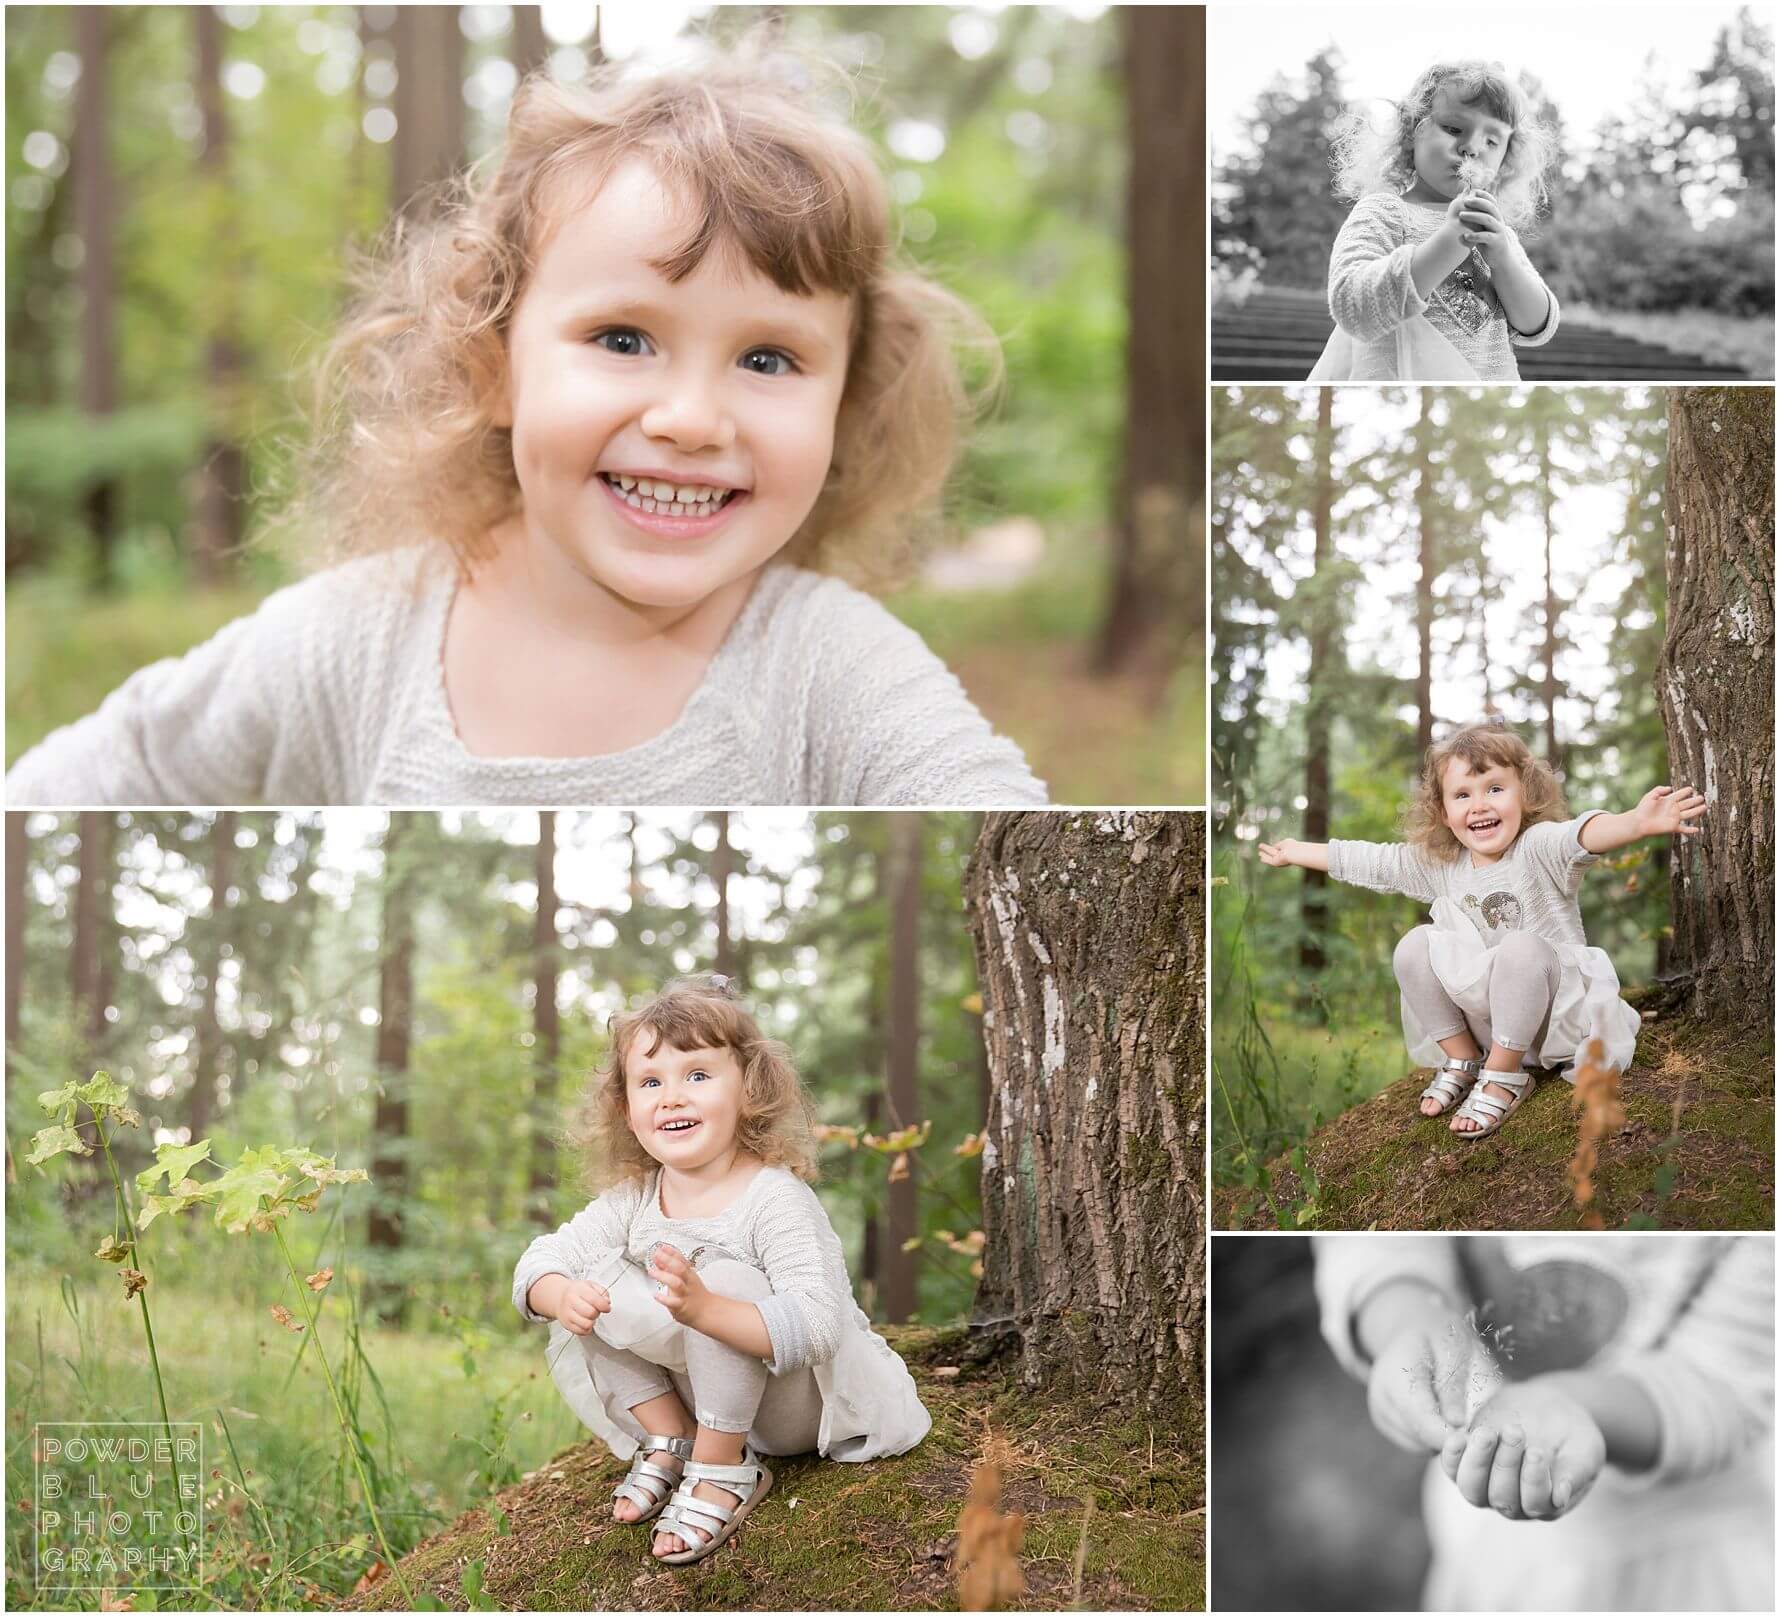 pittsburgh family photography family session at mt tabor park in portland oregon pine trees 3 year old girl butterfly wings